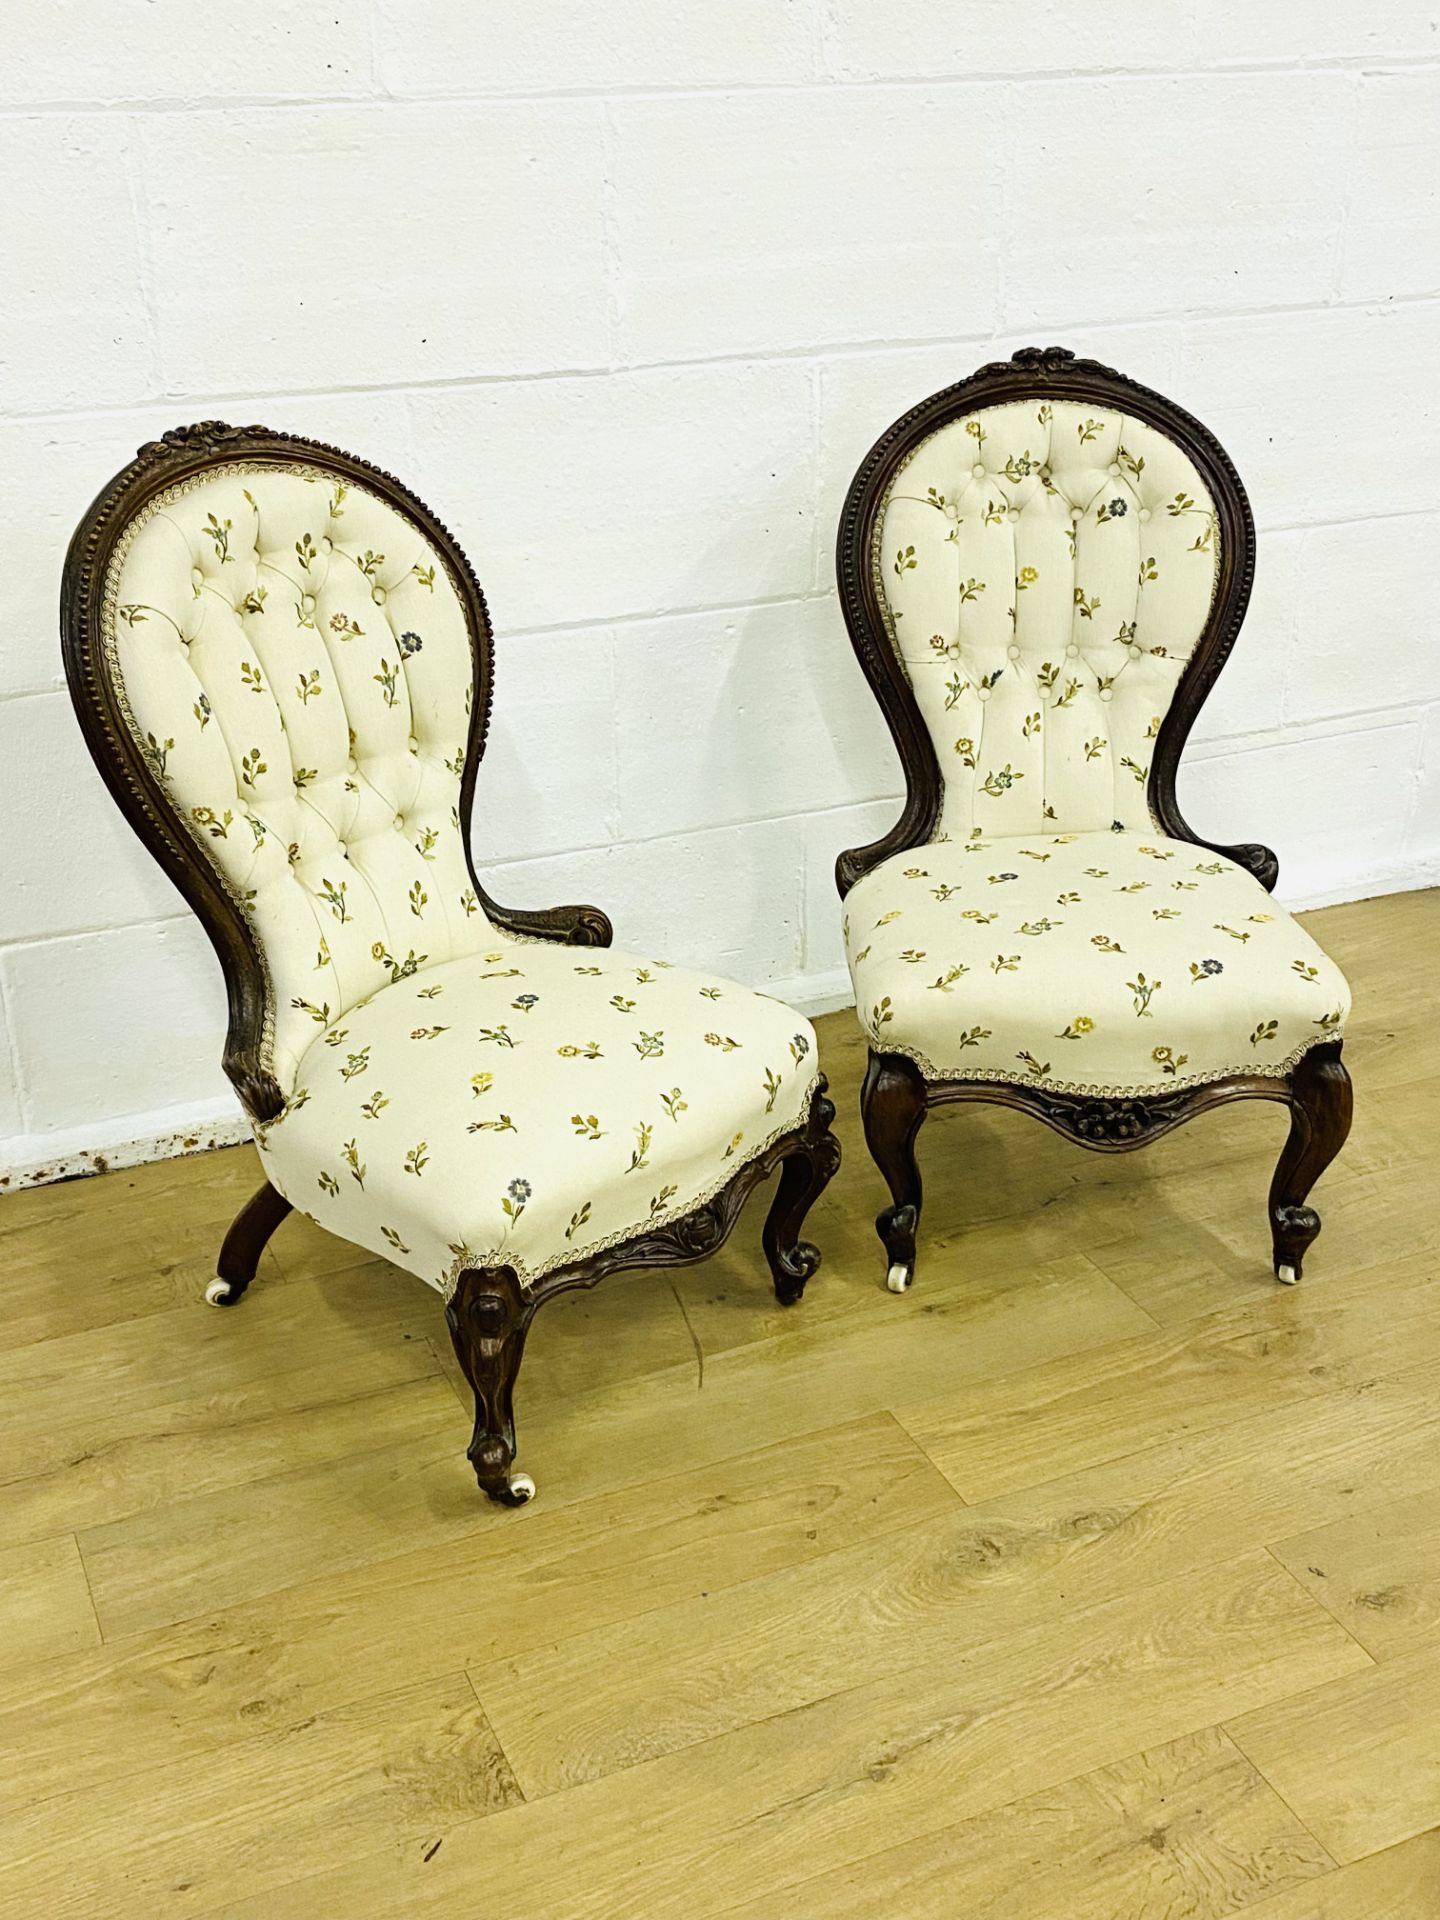 Pair of mahogany framed bedroom chairs - Image 2 of 8